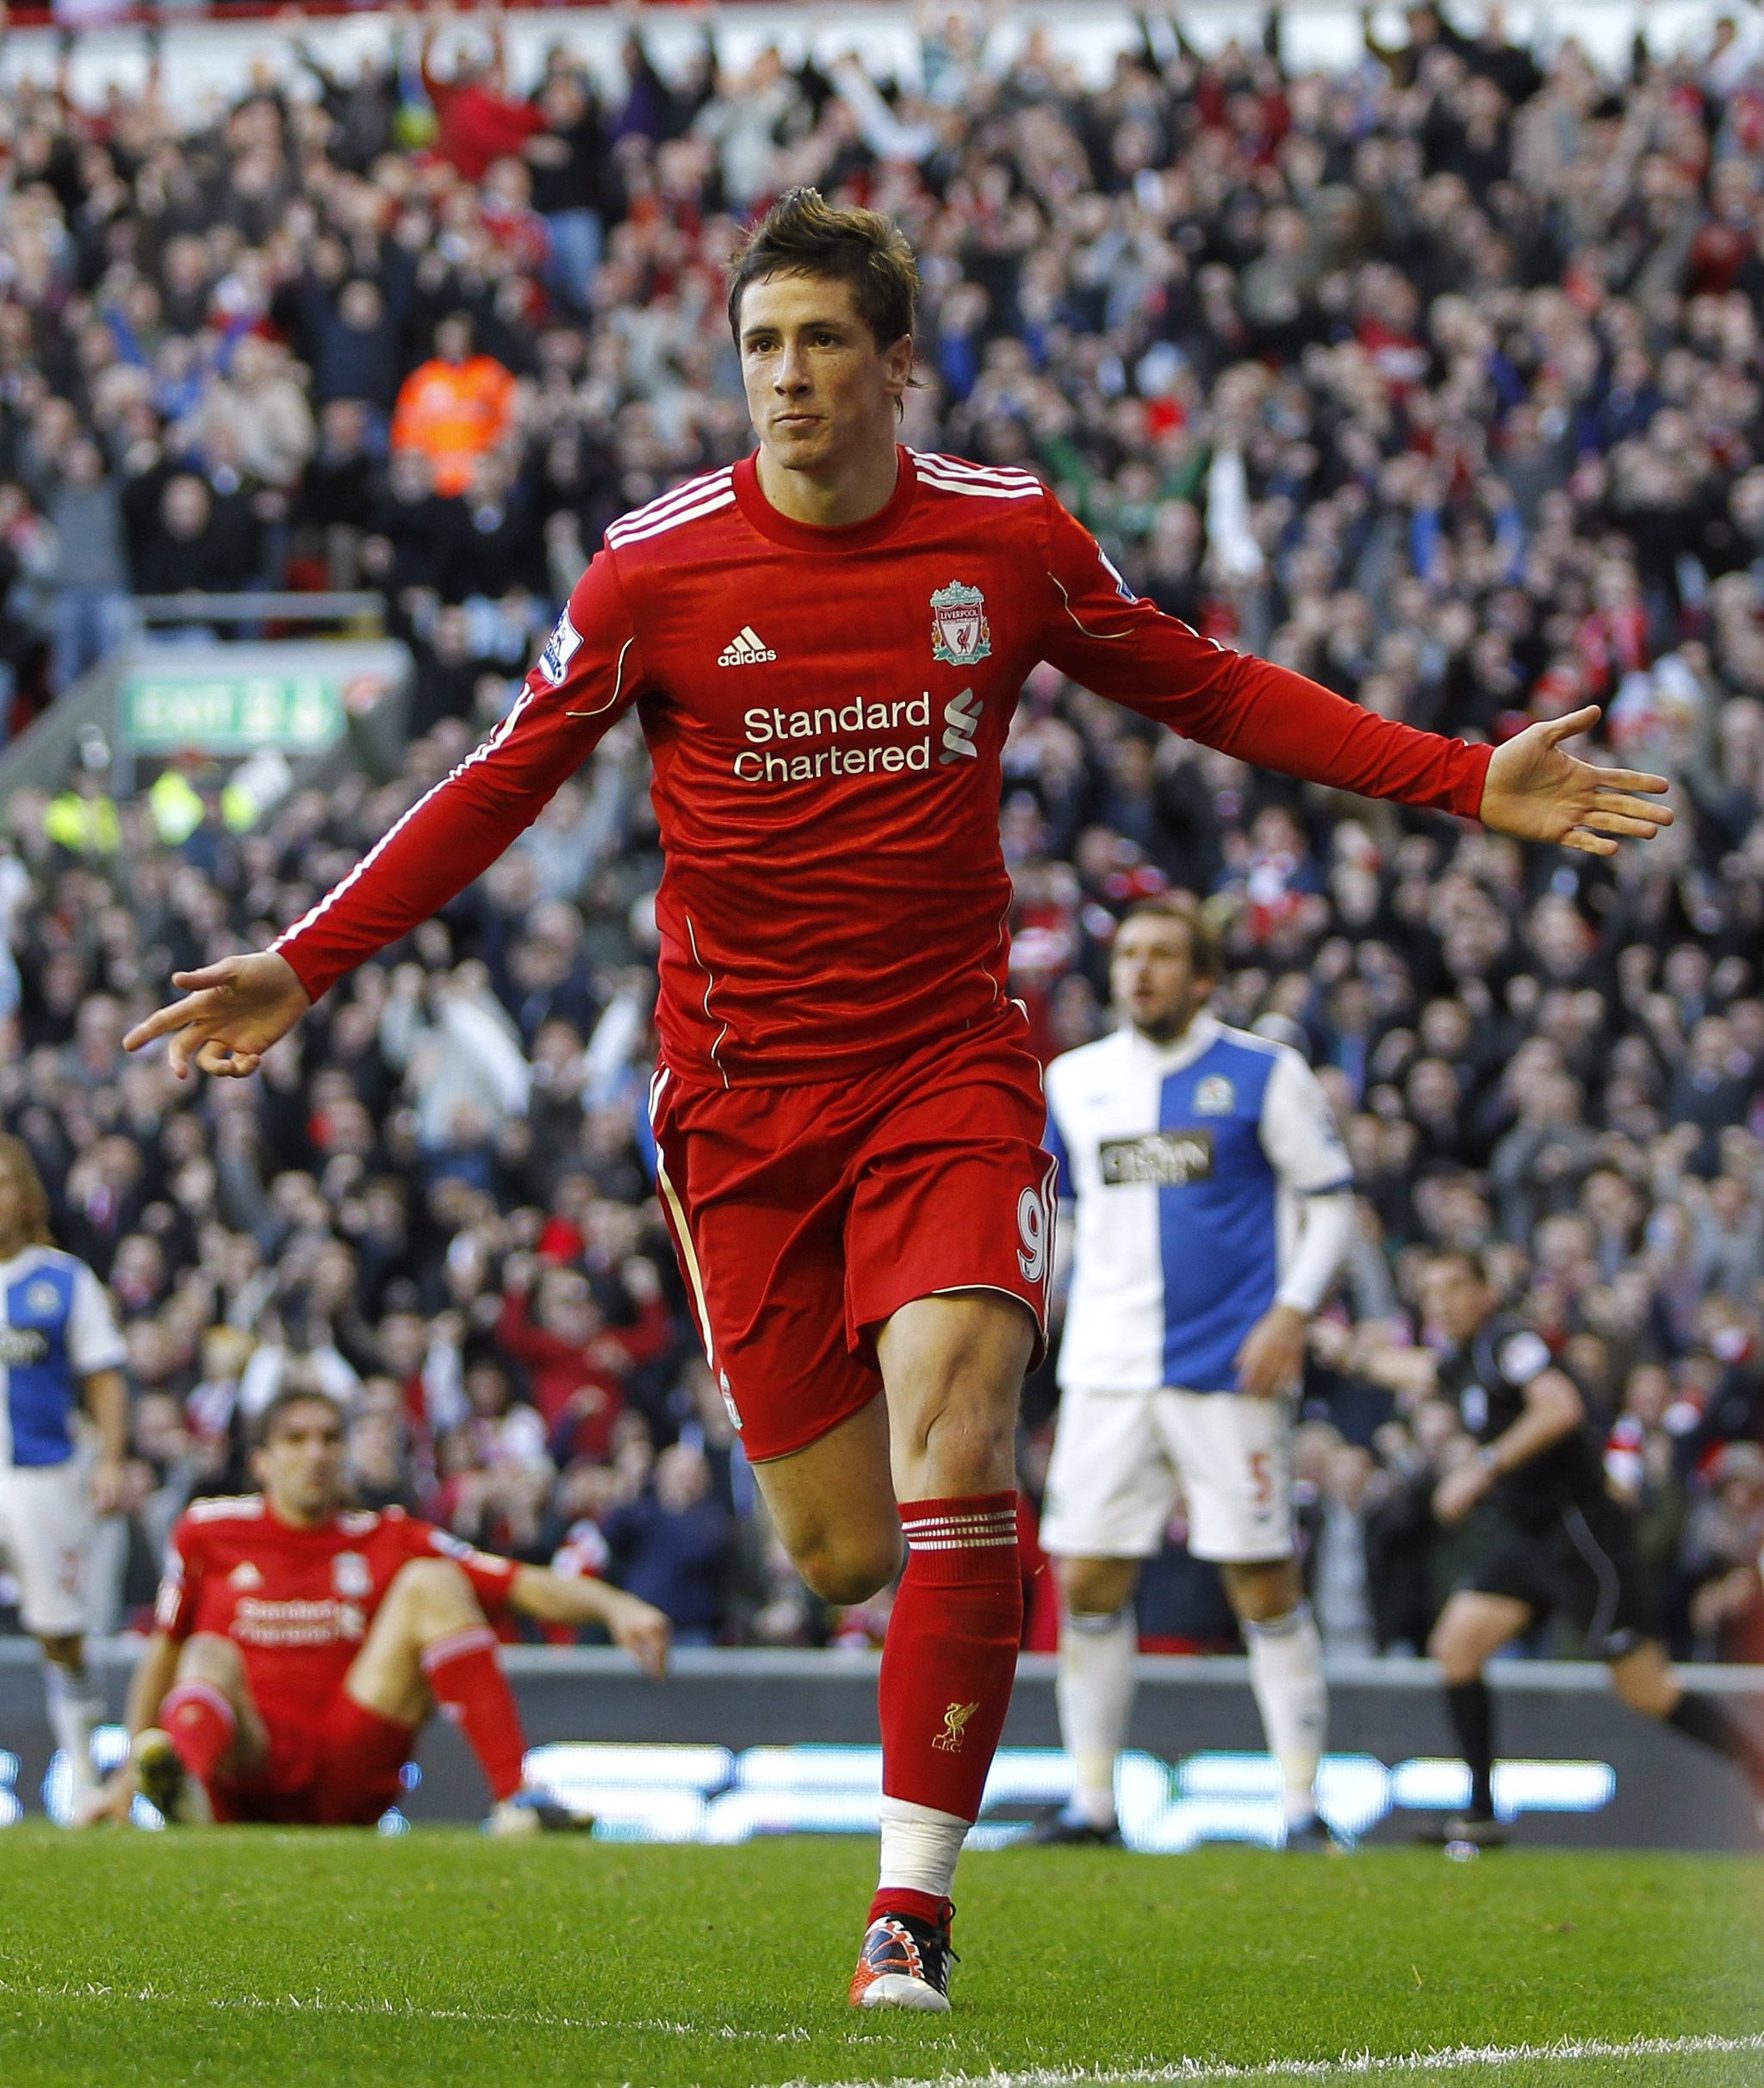  lt;HIT gt;Liverpool lt;/HIT gt;s Spanish player lt;HIT gt;Fernando lt;/HIT gt; lt;HIT gt;Torres lt;/HIT gt; celebrates after scoring his goal against Blackburn Rovers during a Premier League match at Anfield in lt;HIT gt;Liverpool lt;/HIT gt;, England on October 24, 2010. AFP PHOTO/IAN KINGTON FOR EDITORIAL USE ONLY Additional licence required for any commercial/promotional use or use on TV or internet (except identical online version of newspaper) of Premier League/Football League photos. Tel DataCo 44 207 2981656. Do not alter/modify photo